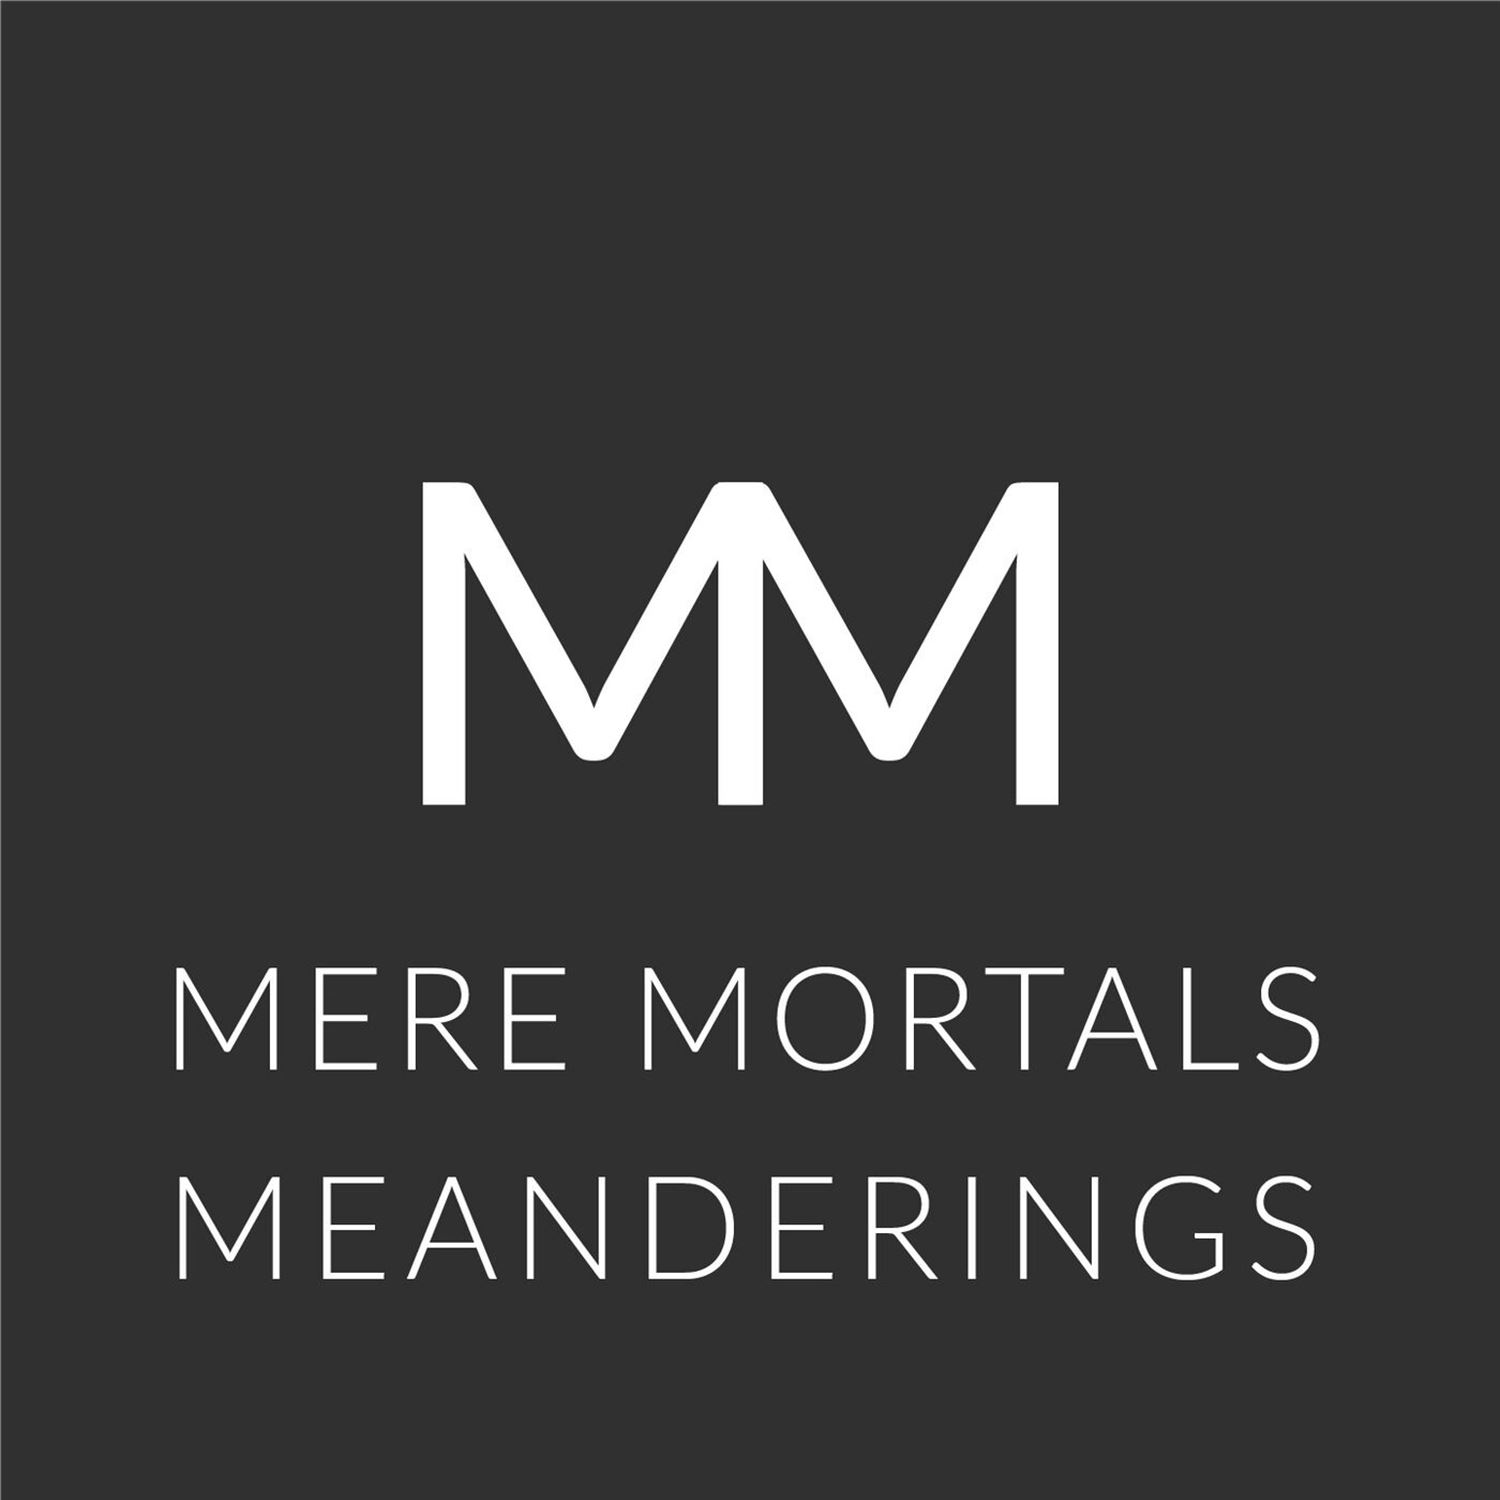 Jehovah's Witness Conversion Attempt (Mere Mortals Episode #85 - Meanderings)